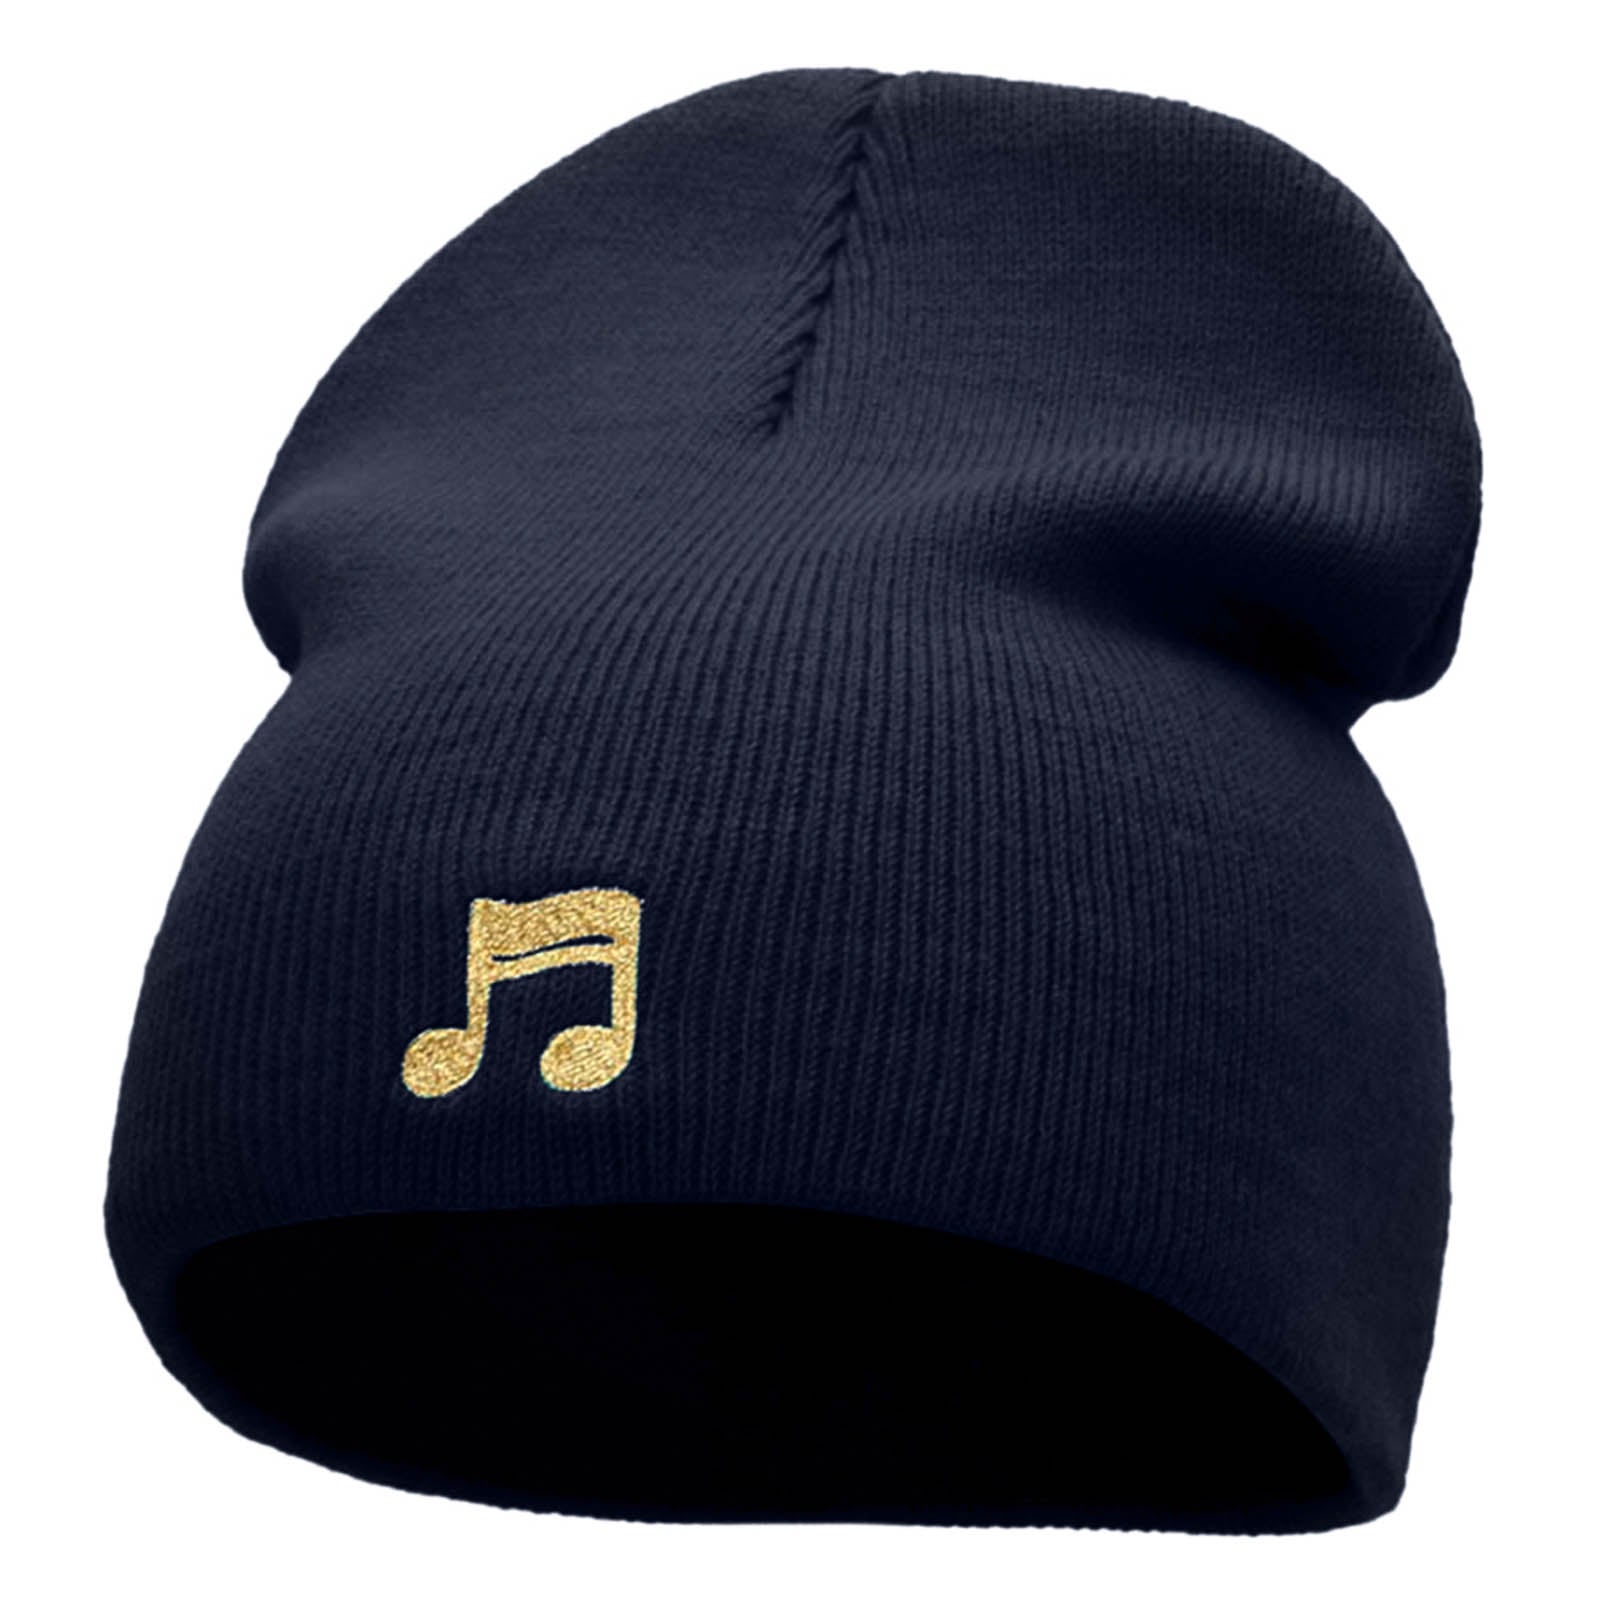 Beamed 16th Note Embroidered Short Beanie - Navy OSFM